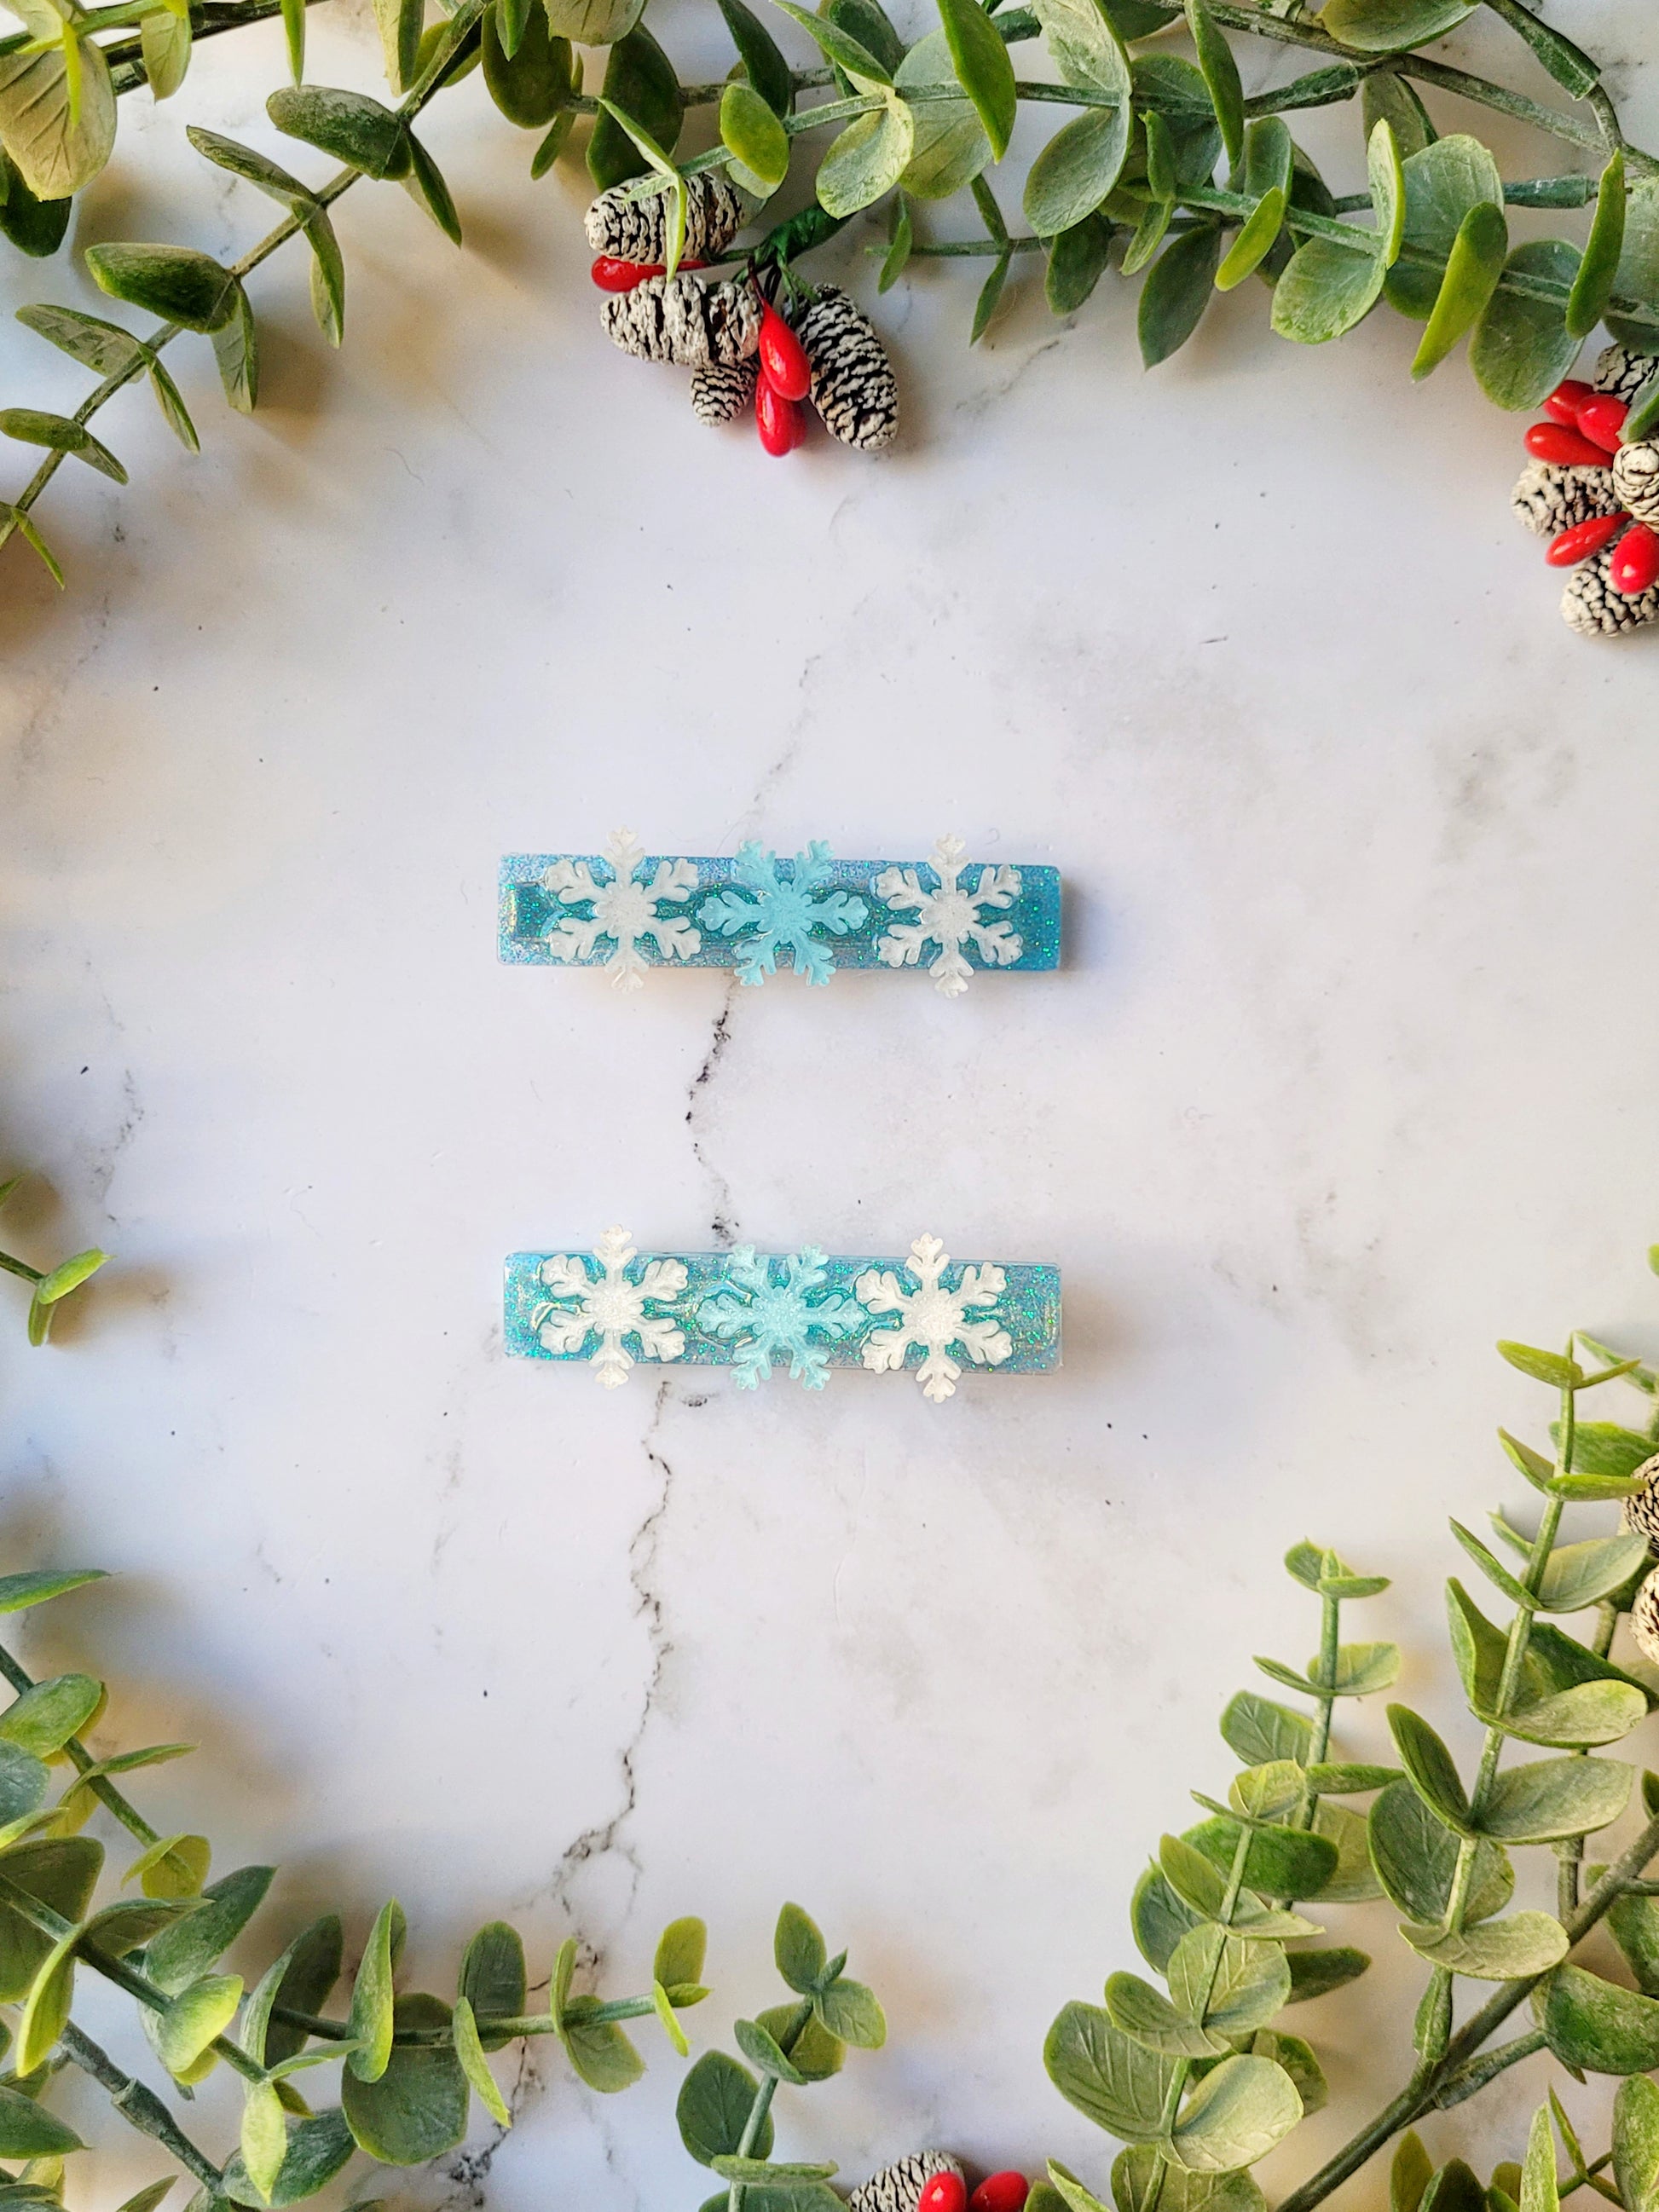 blue glitter hair clip with white and light blue snowflakes on a marble background with foliage. 